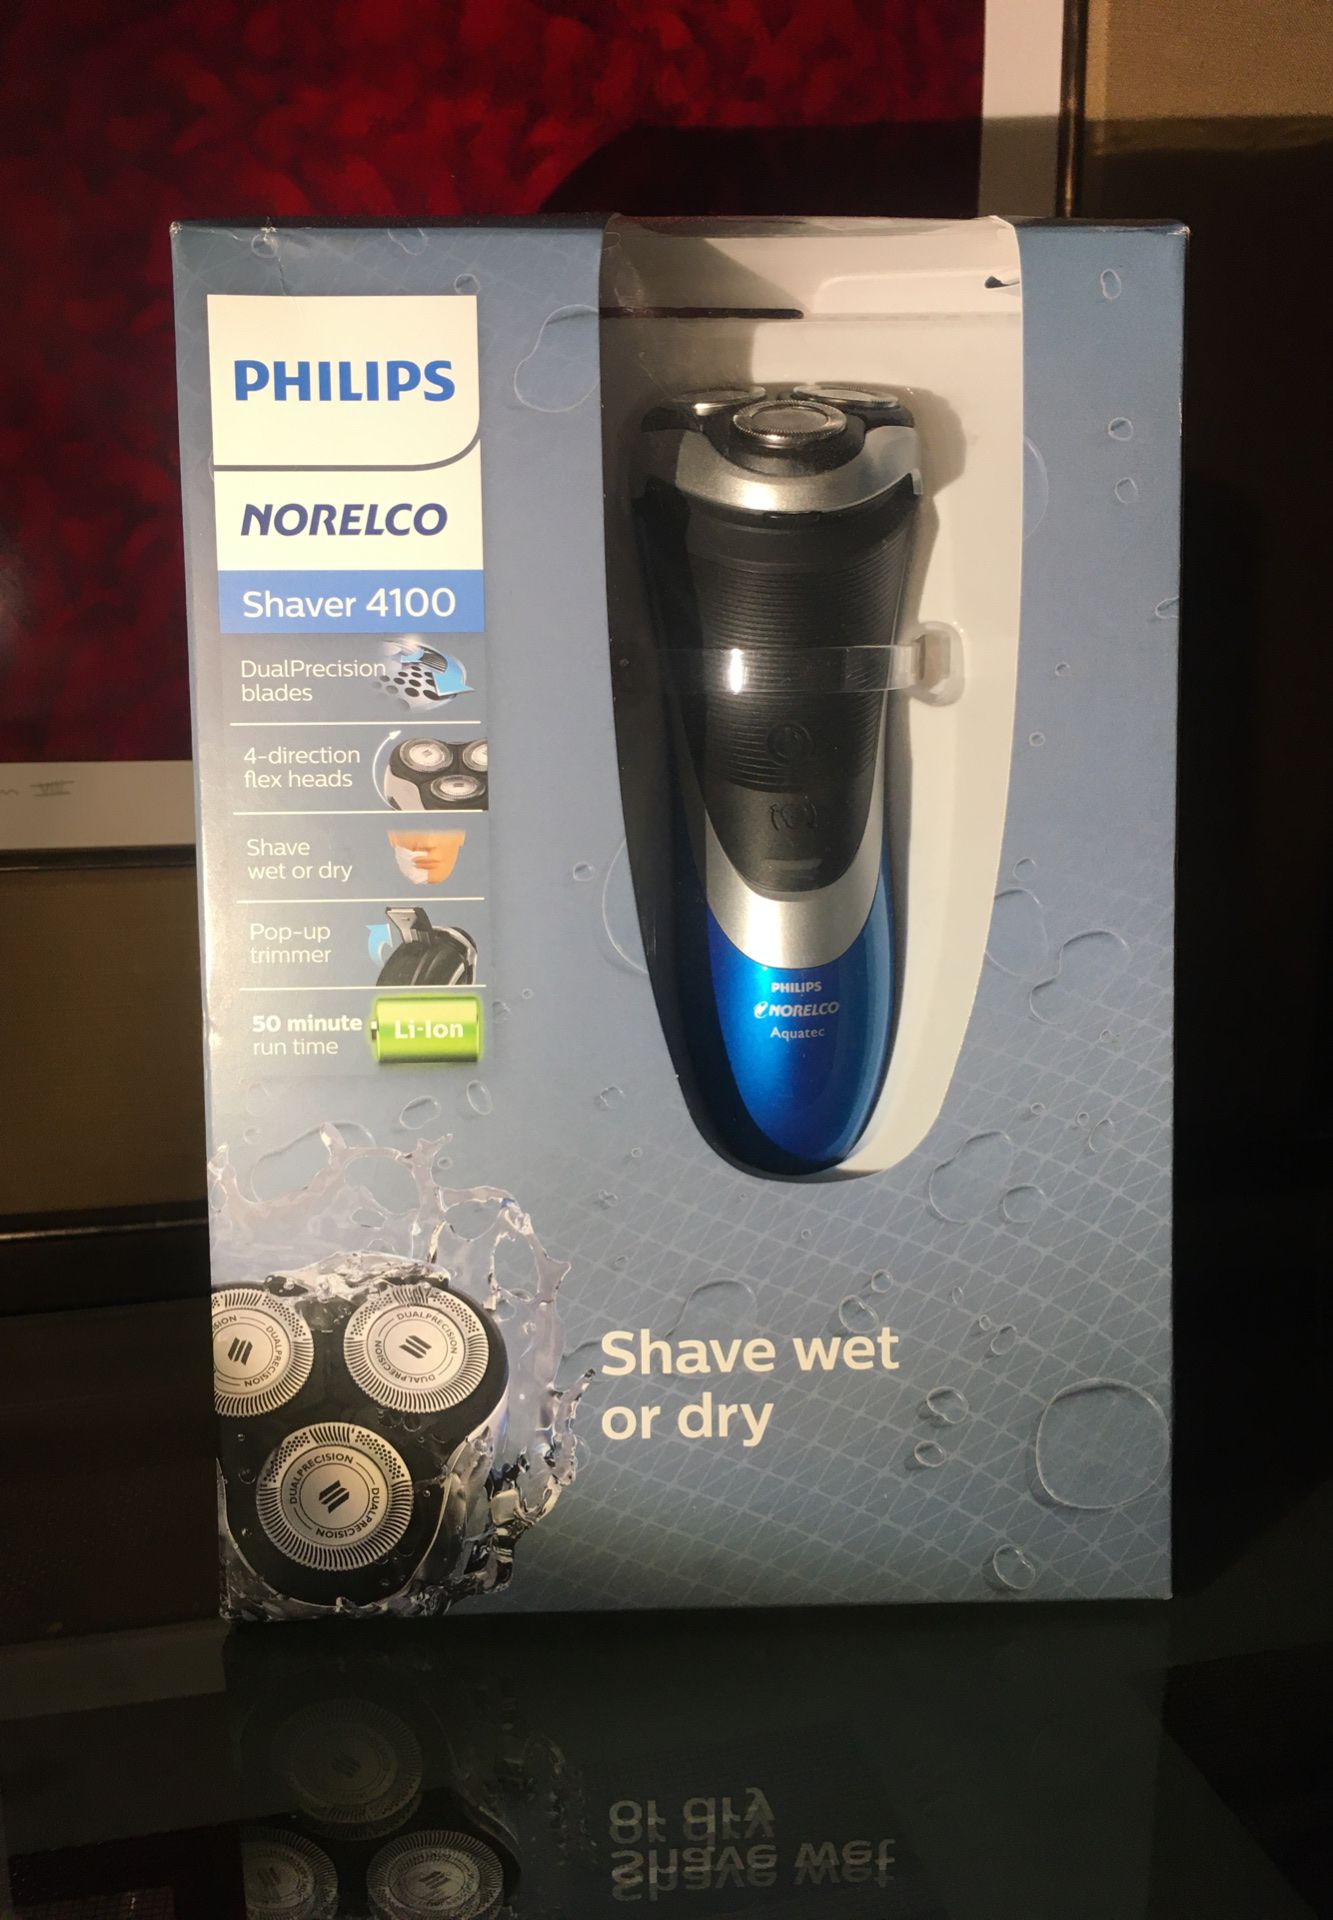 Philips Norelco AT810/41 Shaver 4100 Wet and Dry Electric Shaver